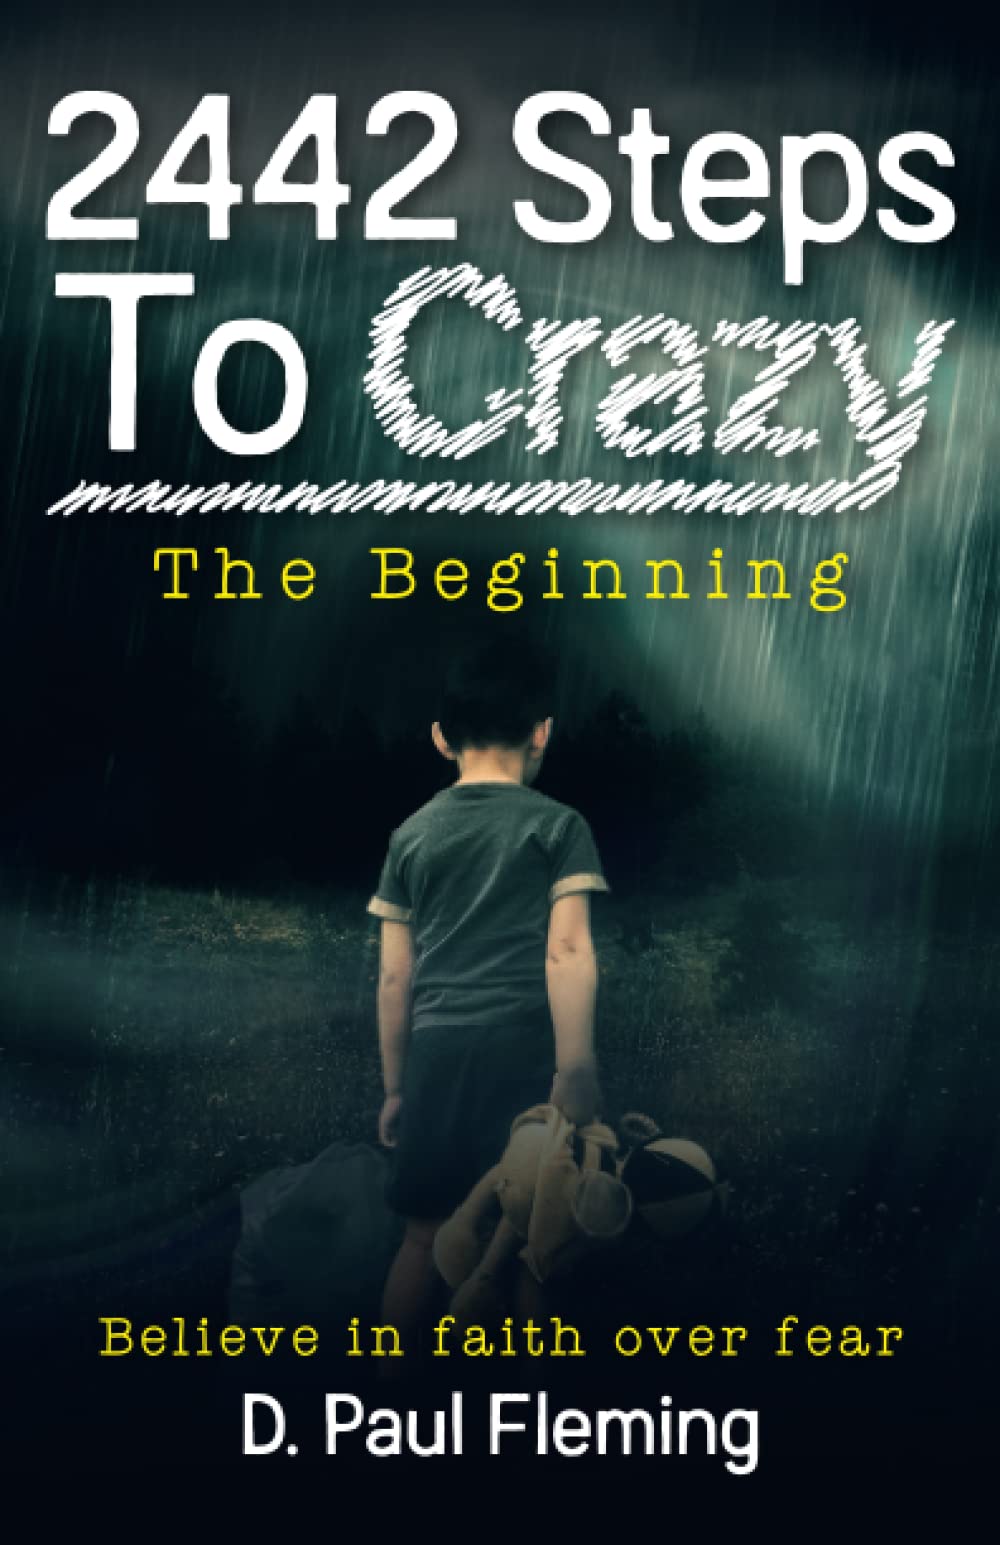 2442 Steps To Crazy - The Beginning - D. Paul Fleming (Pre-Loved)